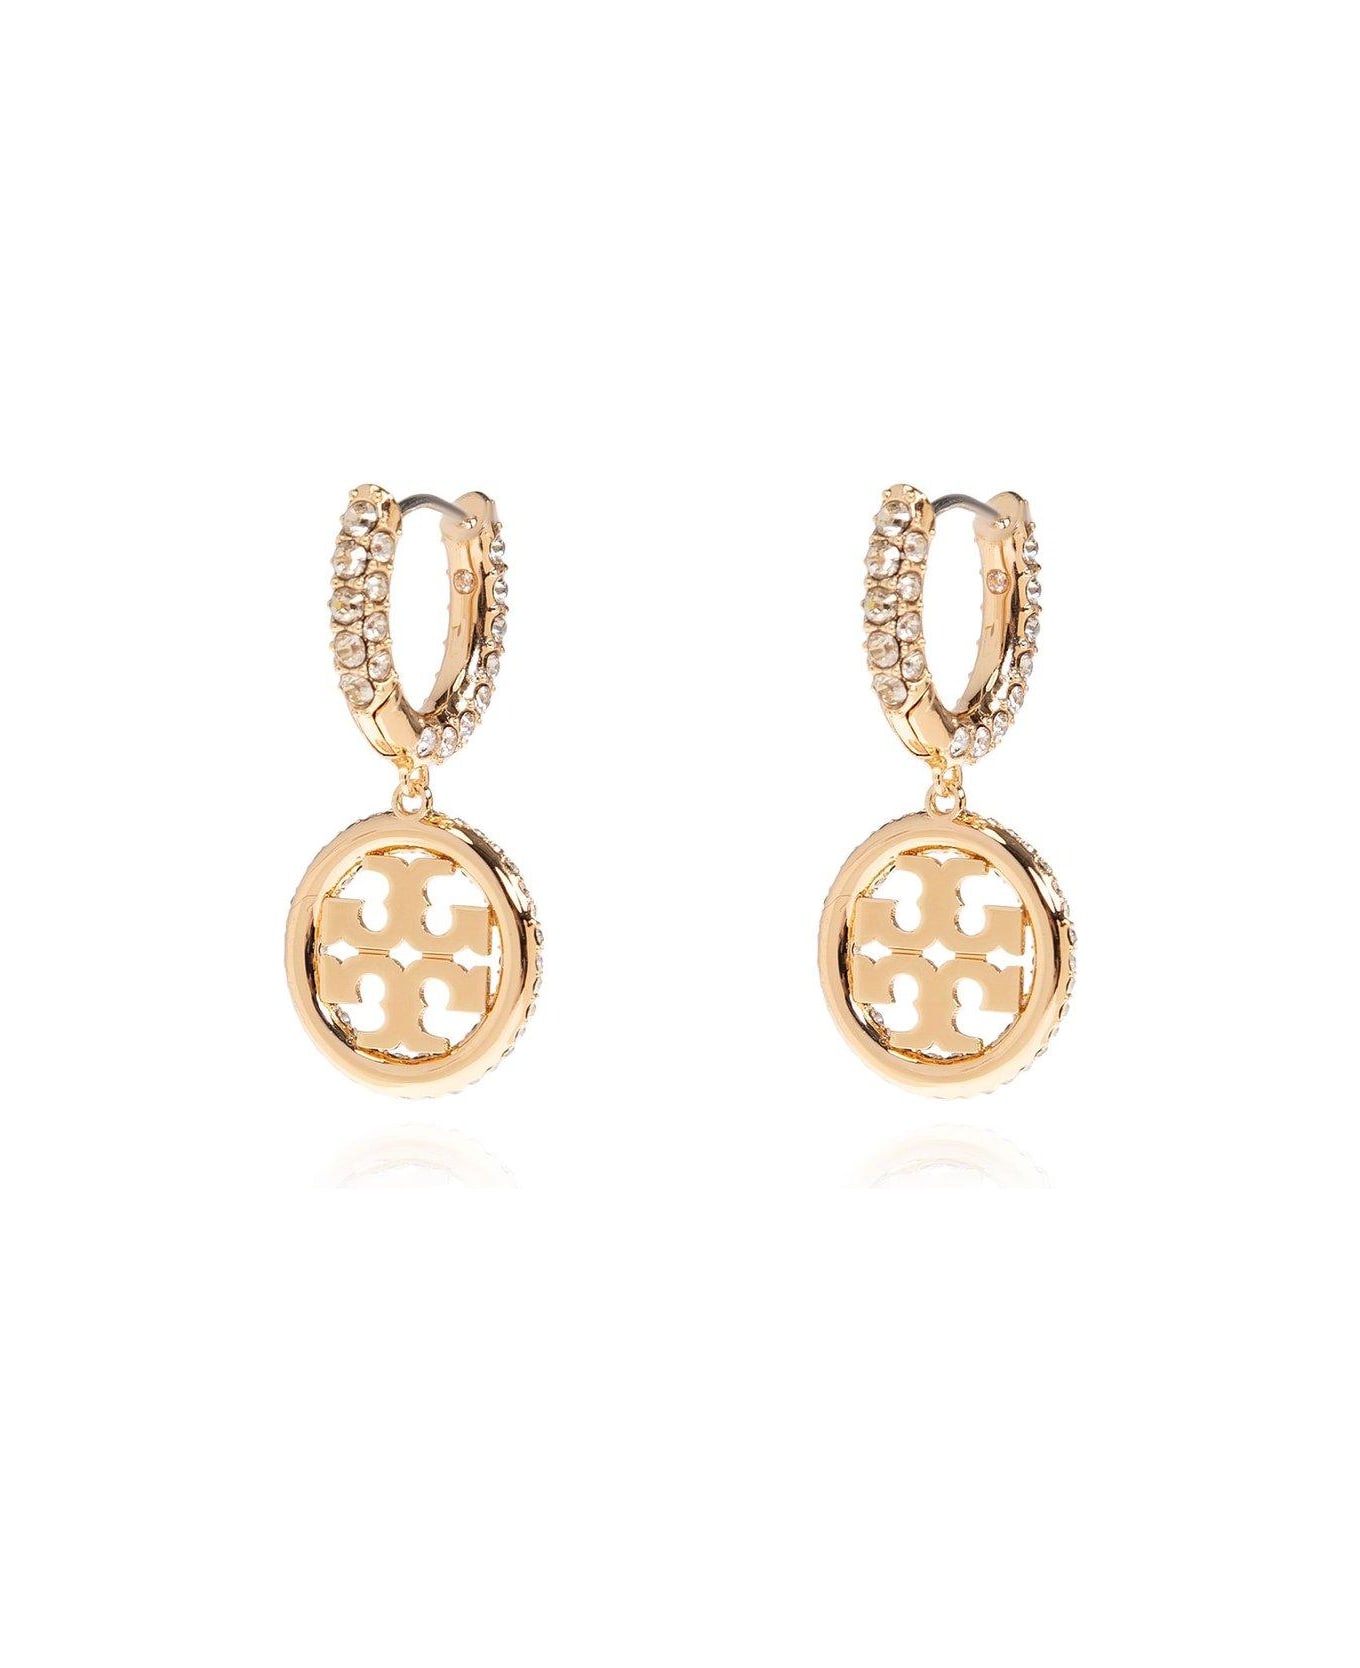 Tory Burch Crystal Embellished Earrings - Gold/crystal